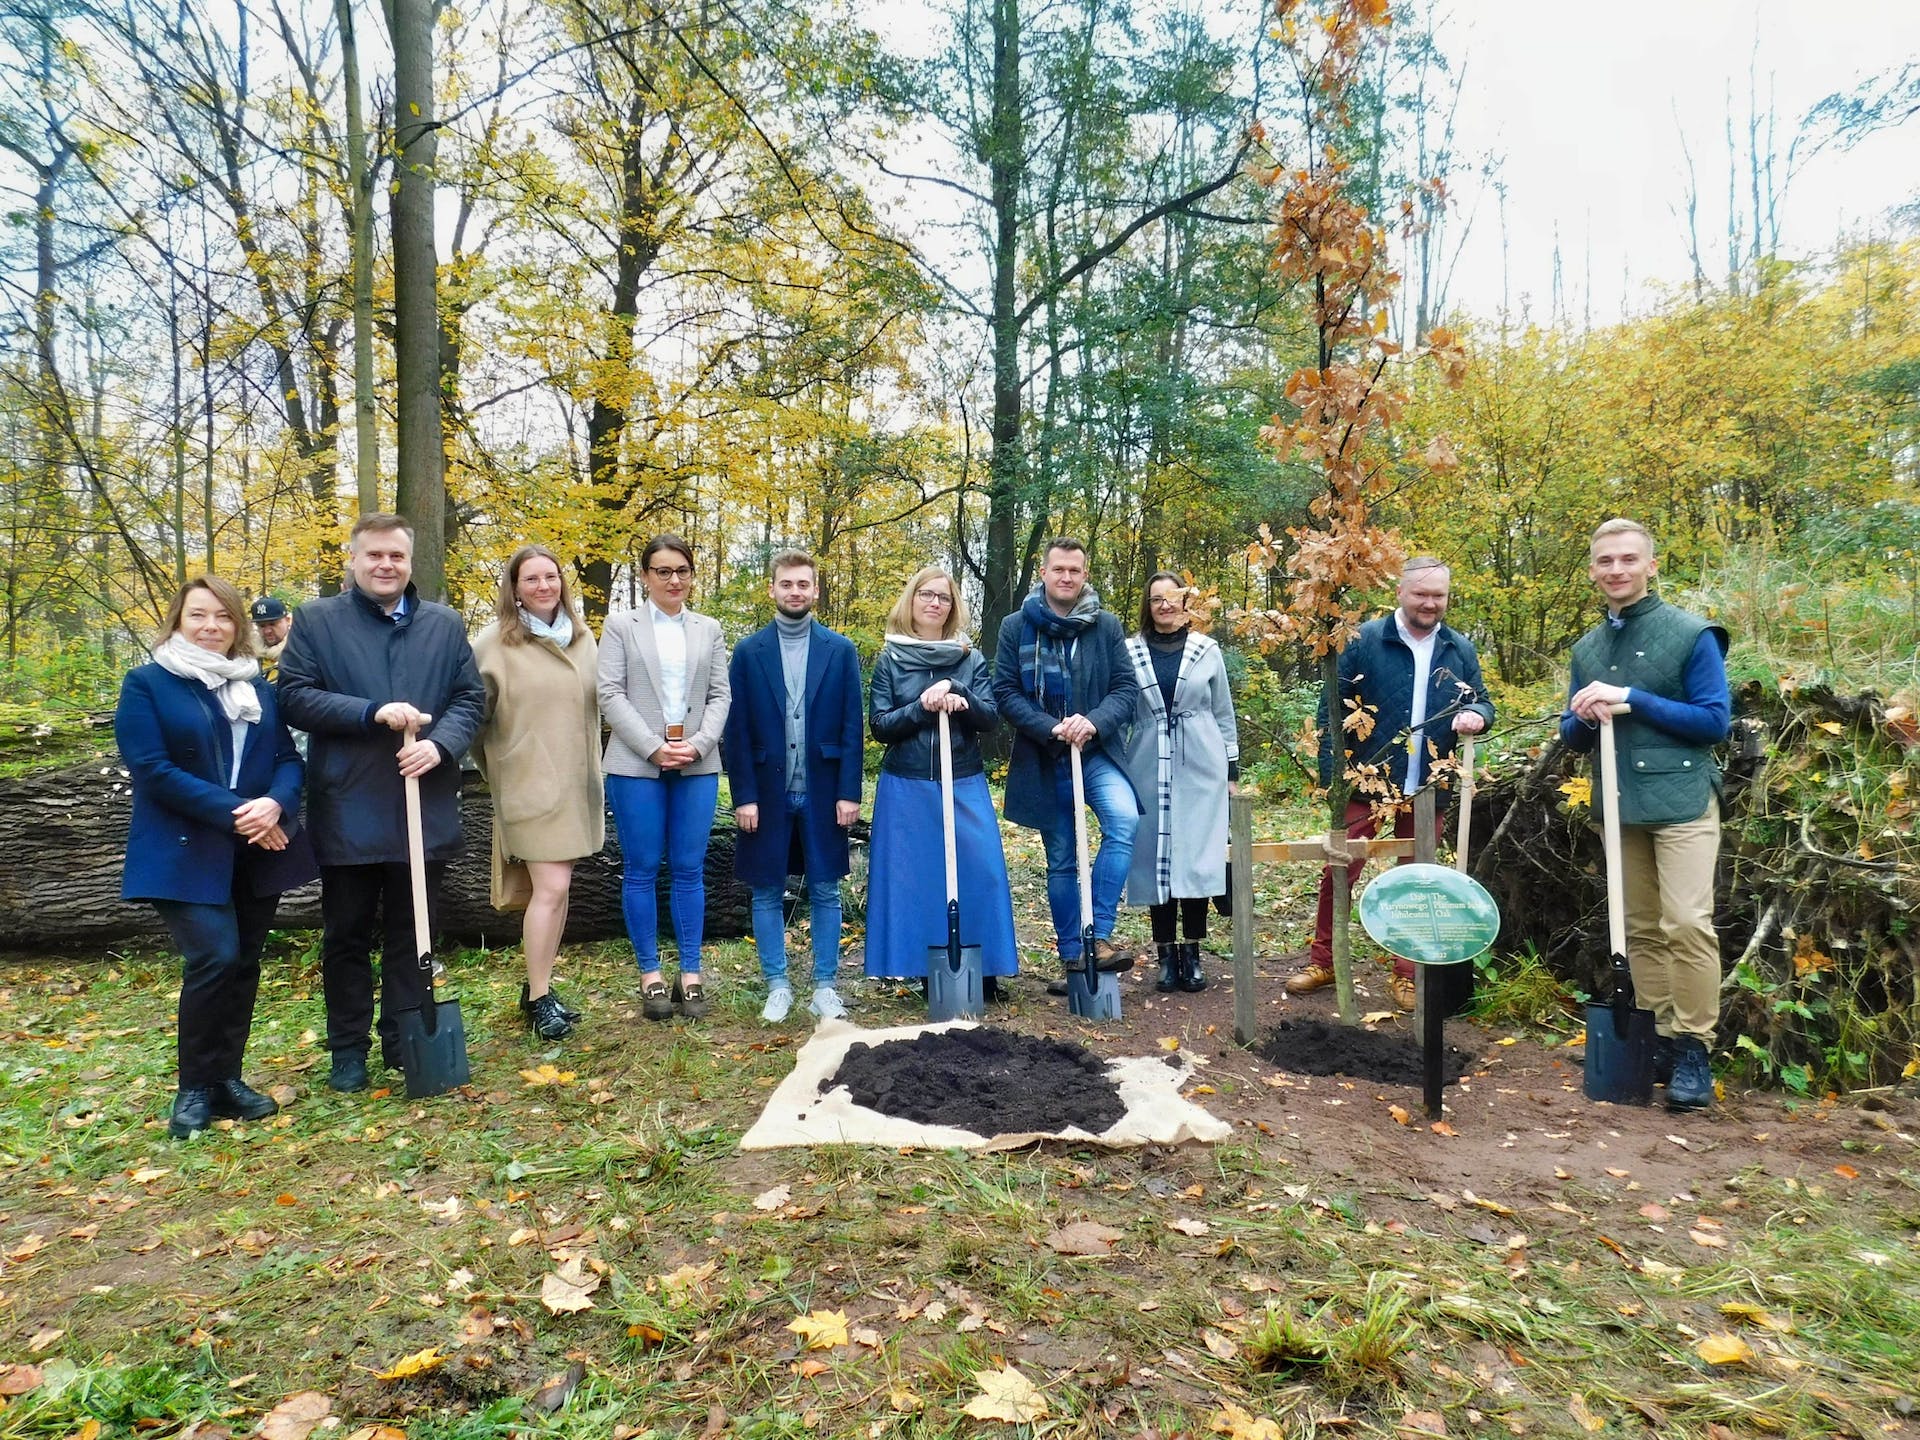 "The Platinum Jubilee Oak" has been planted in the grounds of Sarny Castle (Poland), member of the ERHG